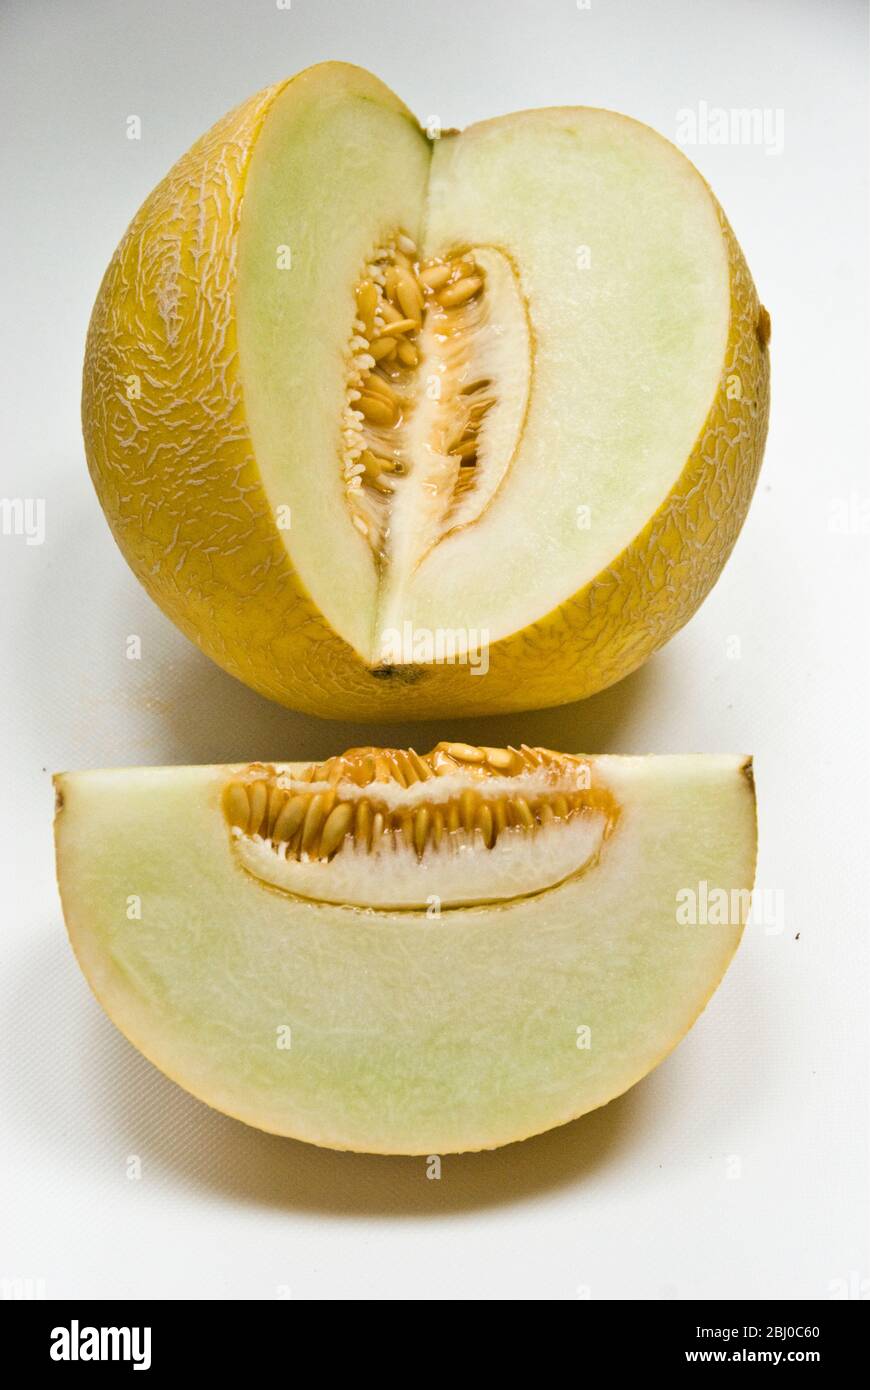 Gallia melon with section cutout on white background - Stock Photo